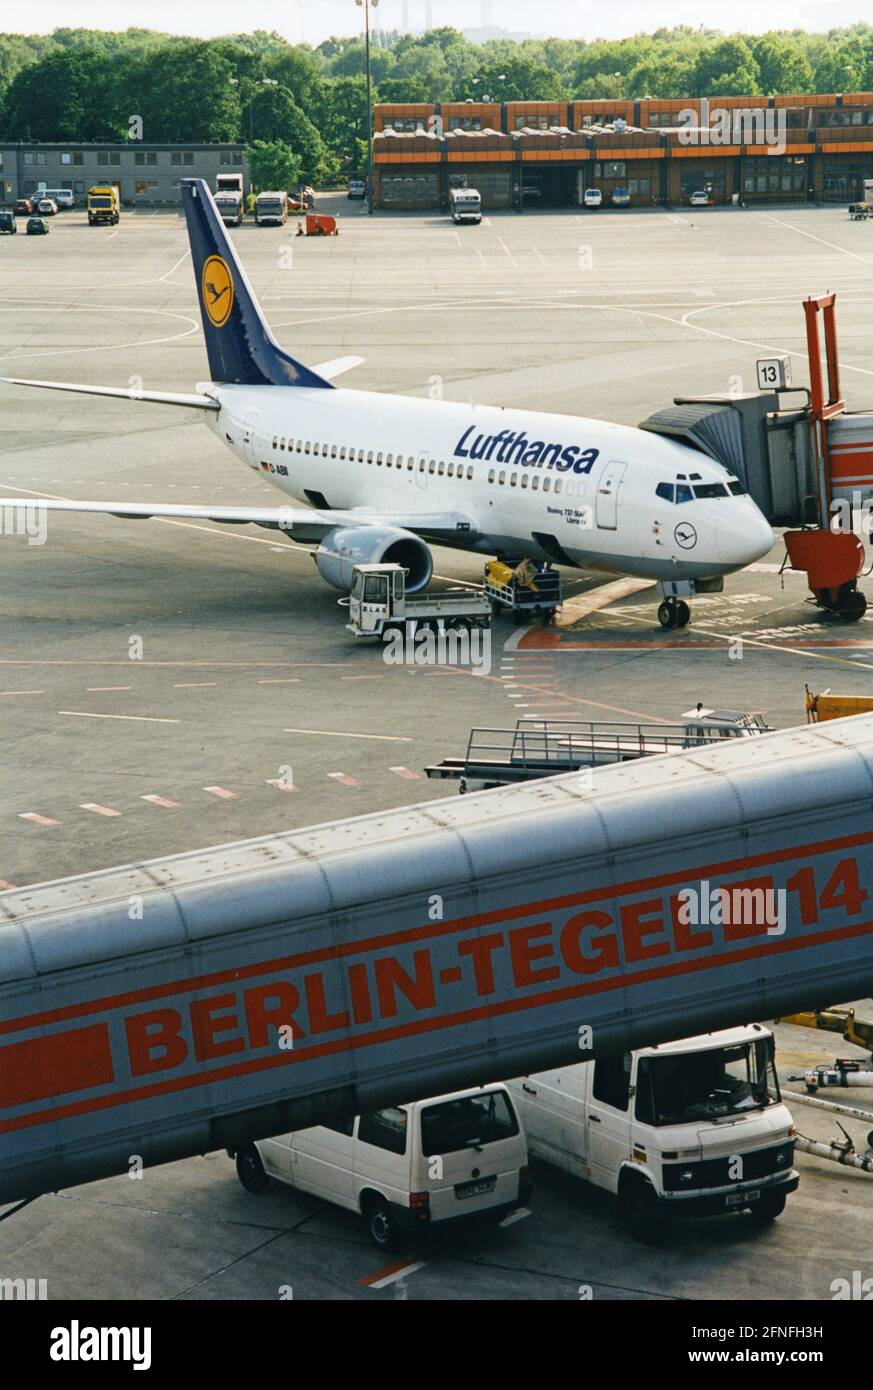 "A Lufthansa Boeing 737-500 (registration D-ABII, baptismal name ""Lörrach"") at the gate at Berlin-Tegel Airport. [automated translation]" Stock Photo